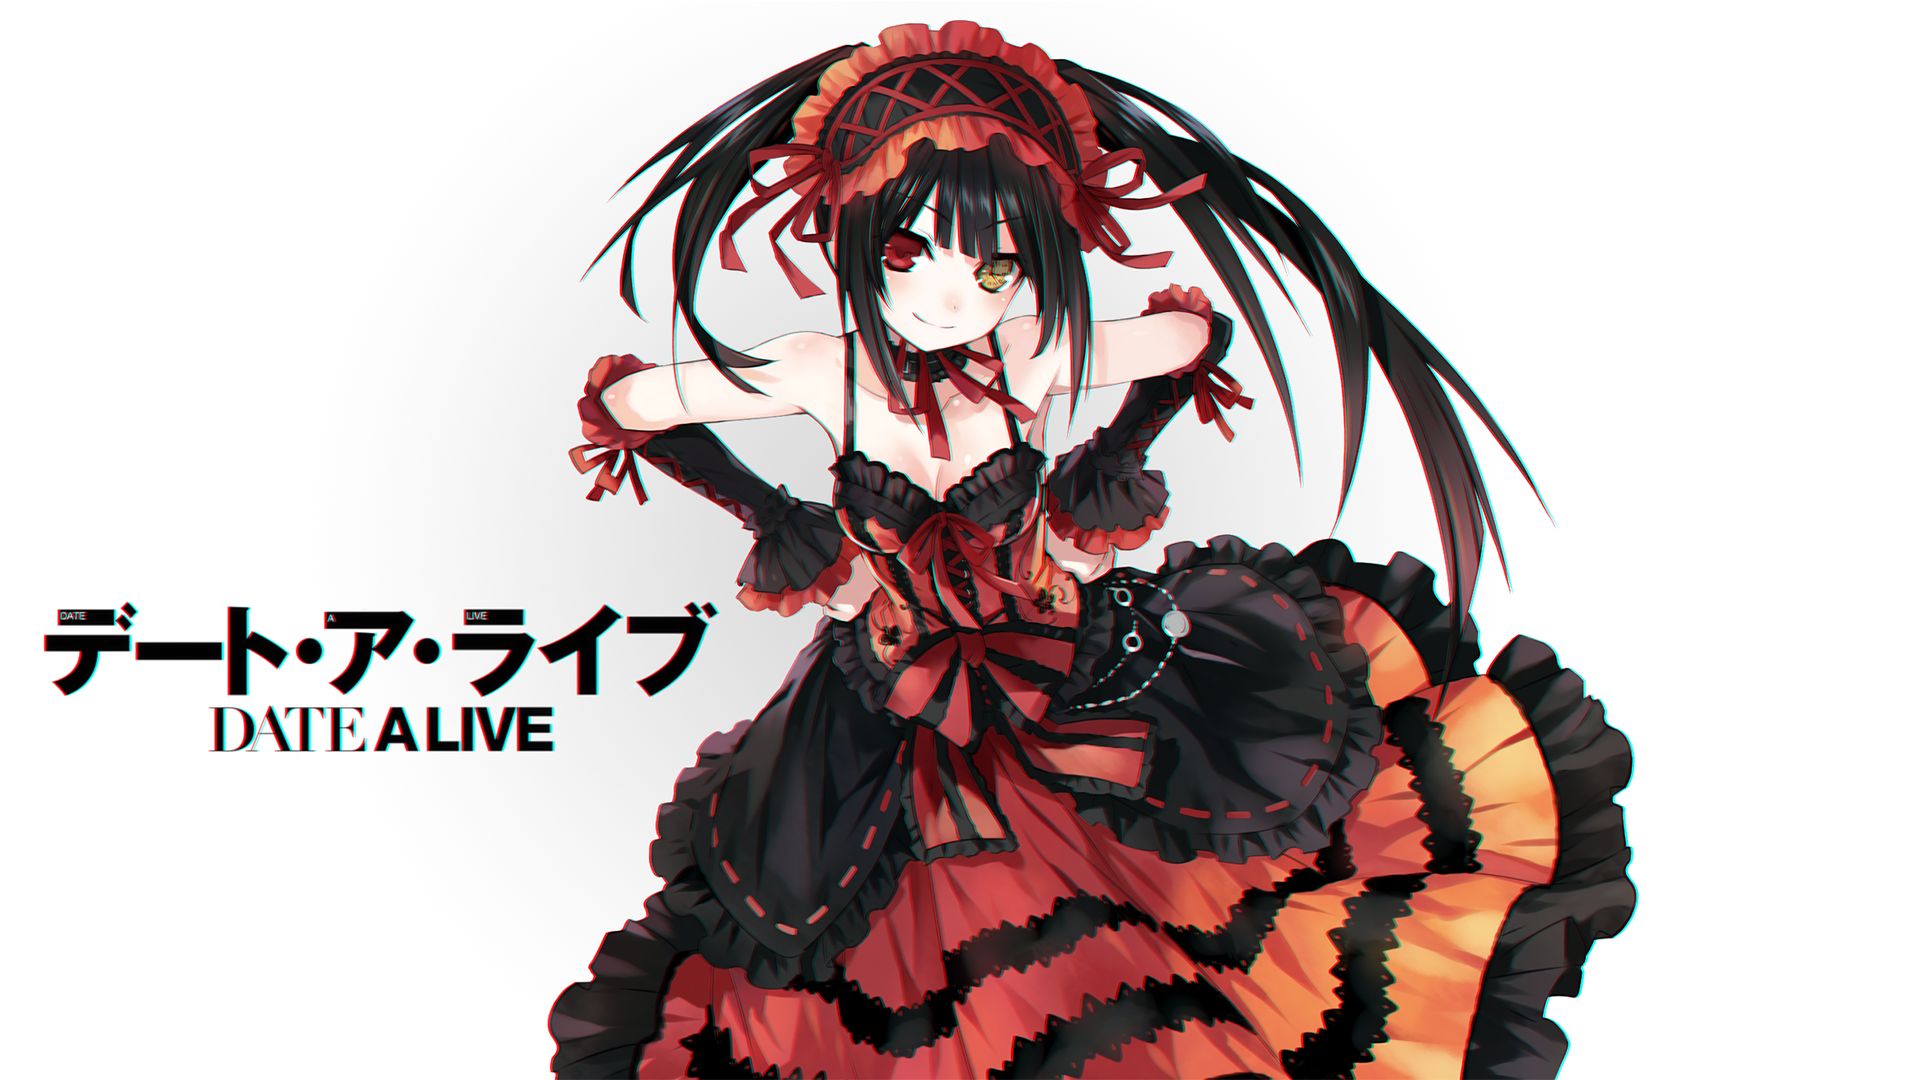 Date A Live wallpapers for smartphones iPhone Android 720x1280